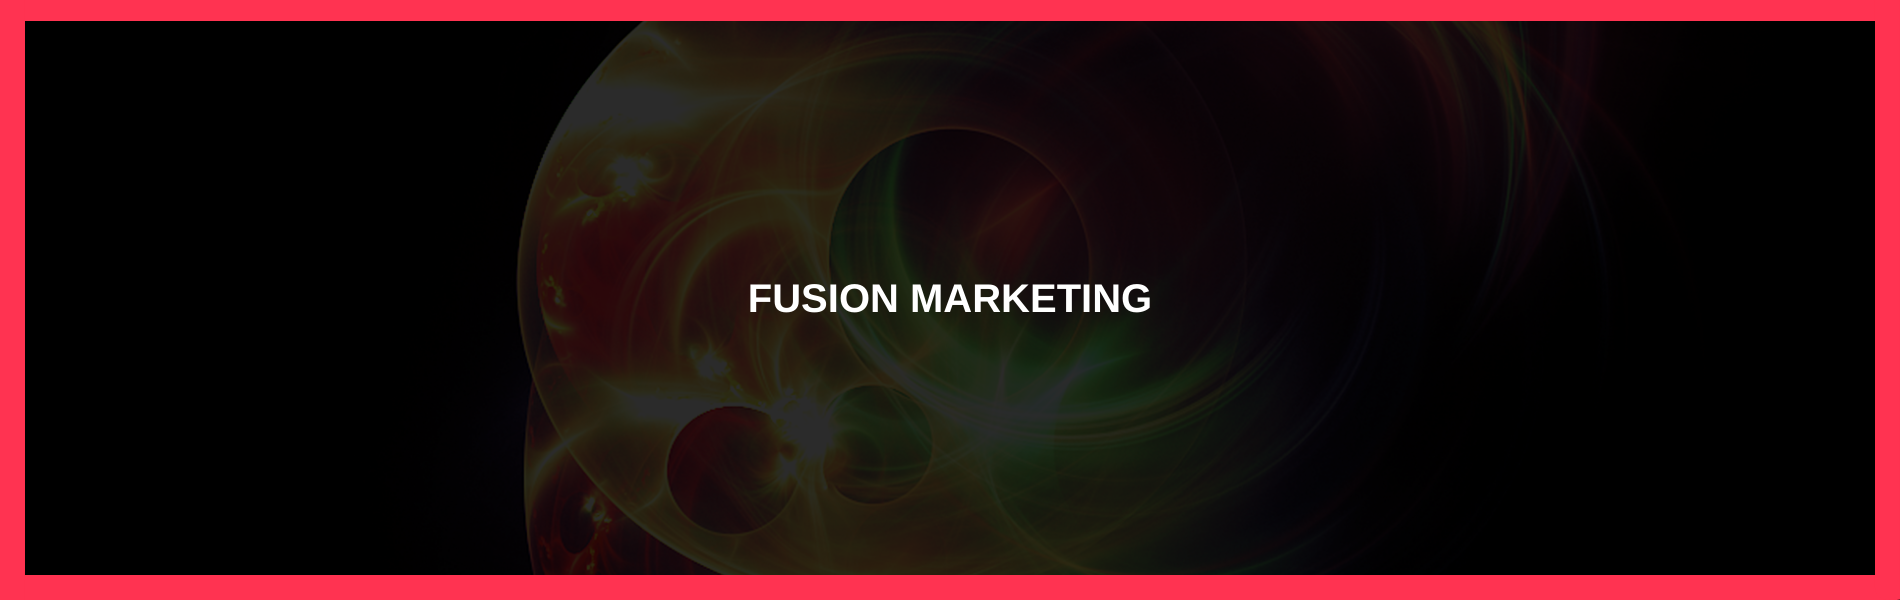 What is Fusion Marketing?